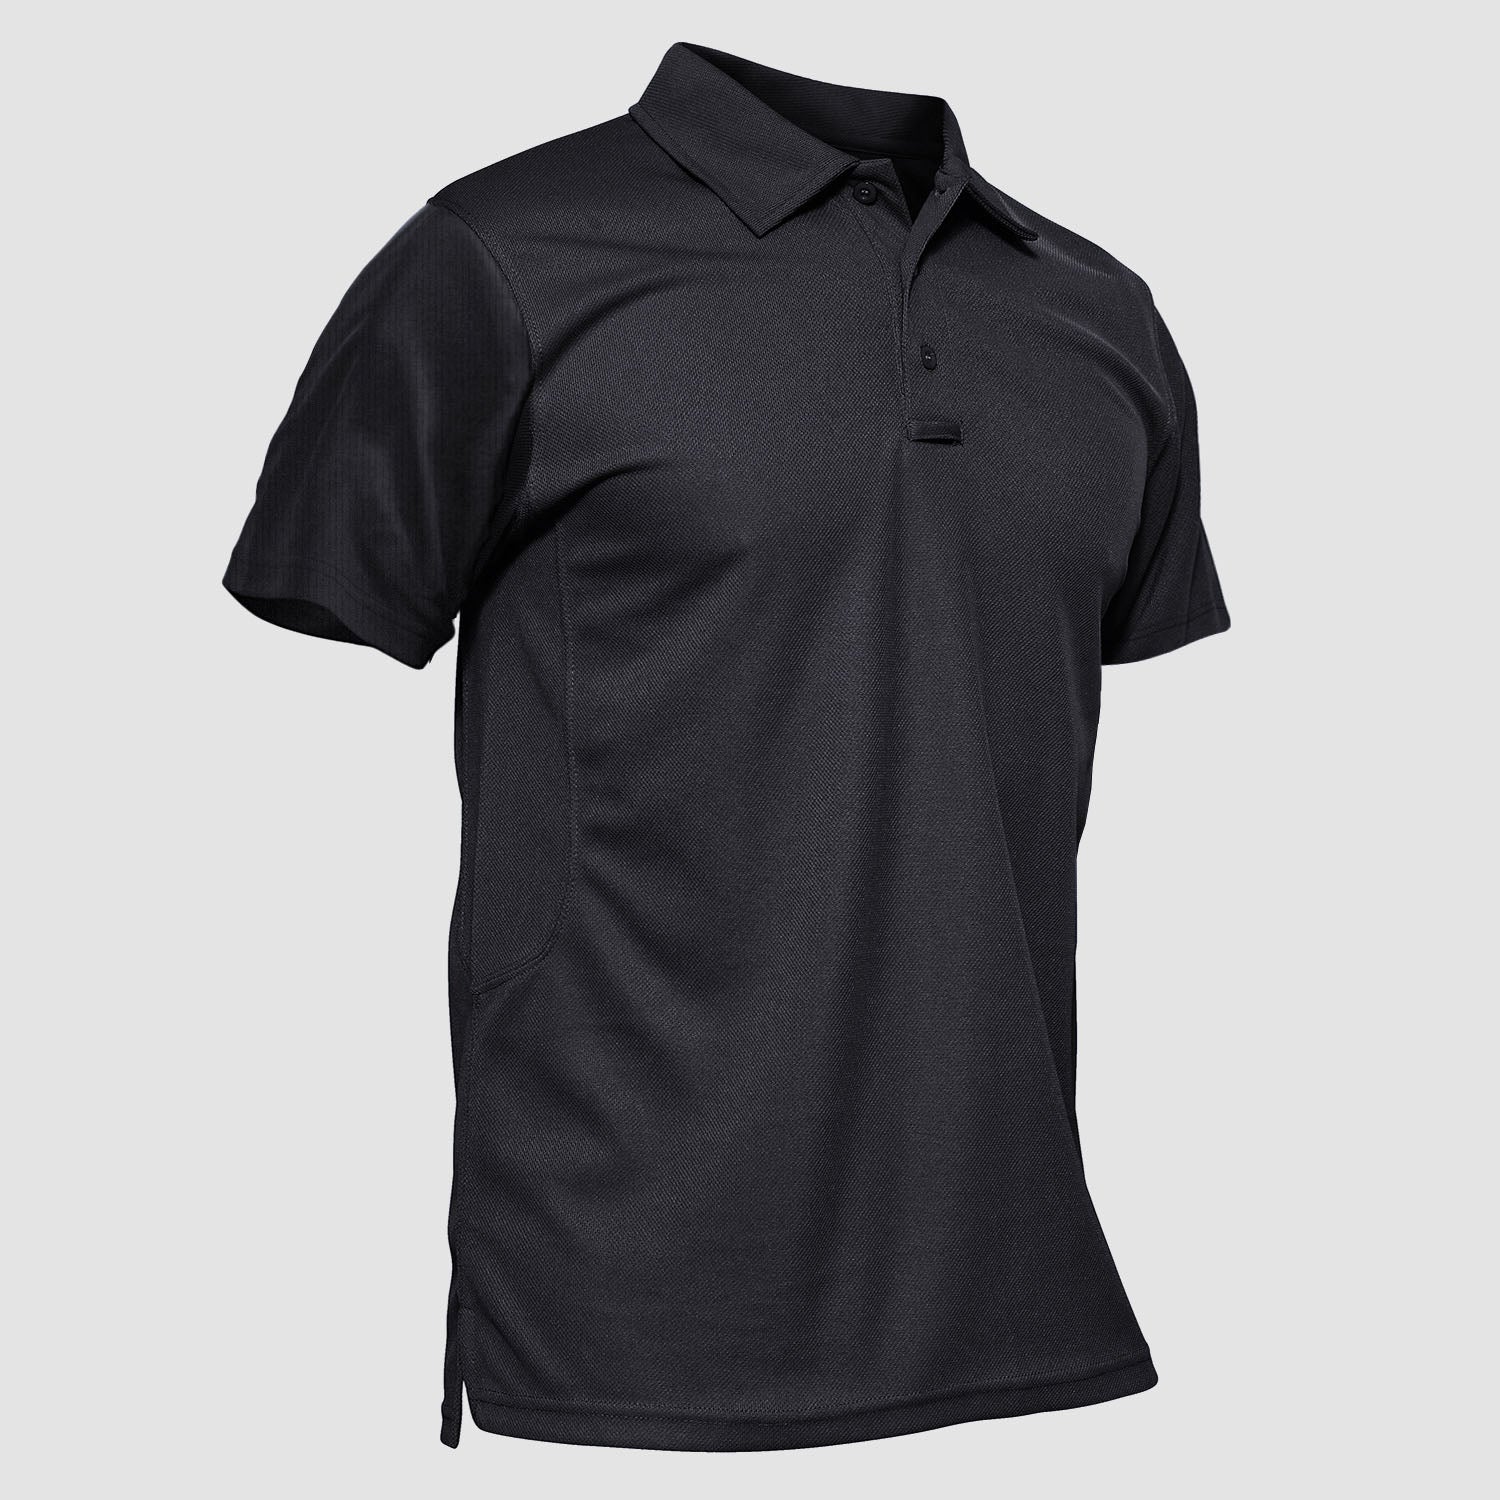 【Buy 4 Get 4th Free】Men's Short Sleeve Polo T-shirt Quick Dry